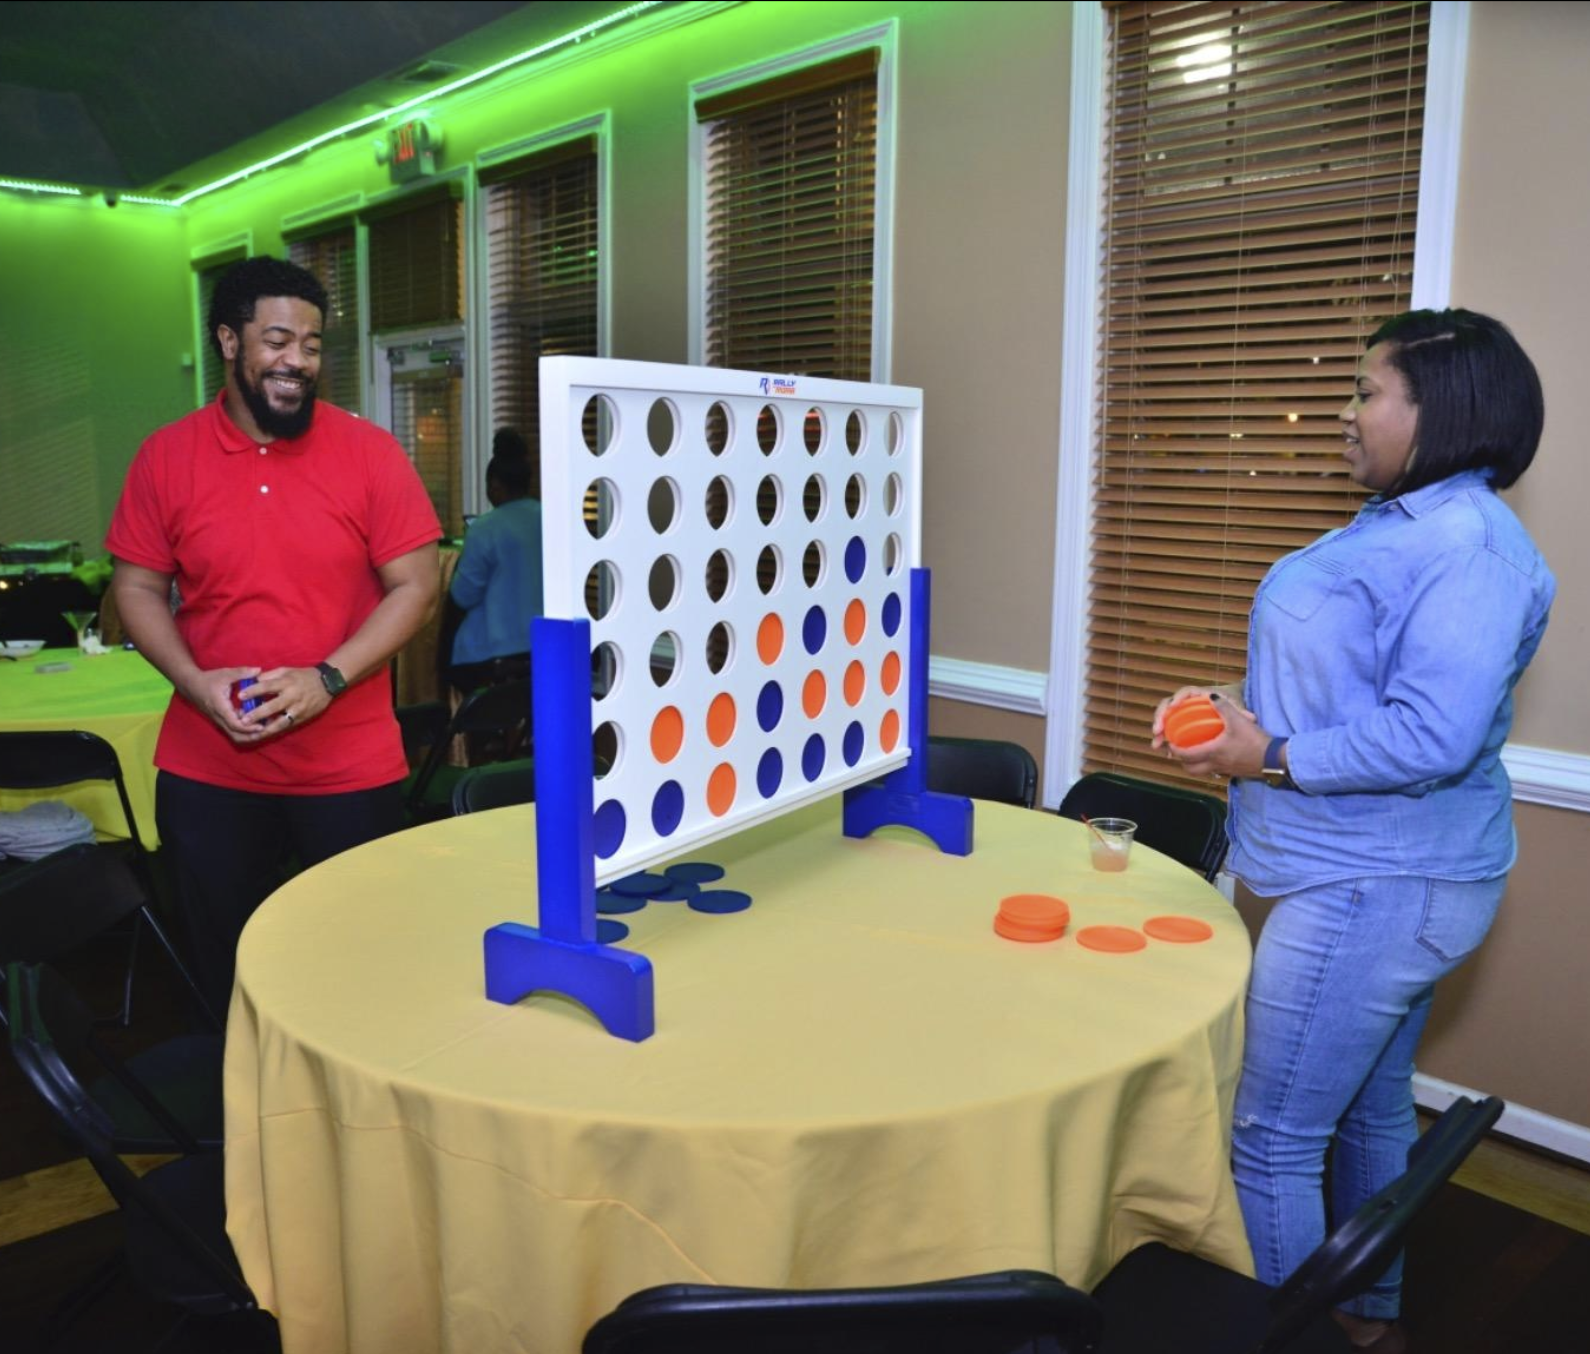 an oversized connect four game on a table which has several holes in it where chips can be inserted via the open top slot. Two people are standing on either side of it playing the game.